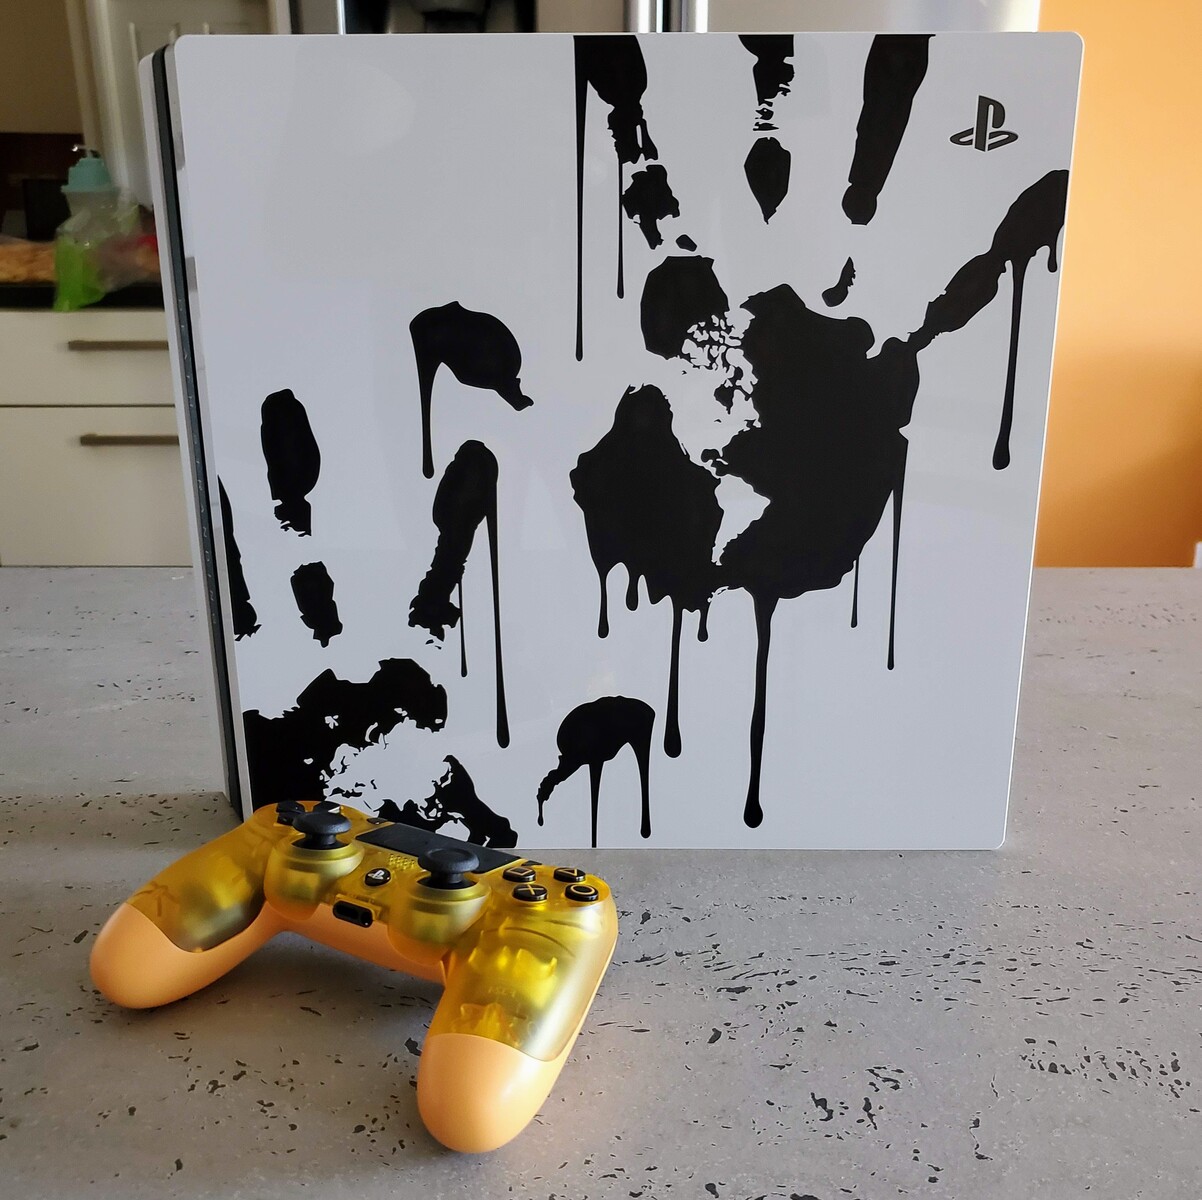 ps4 pro limited edition consoles